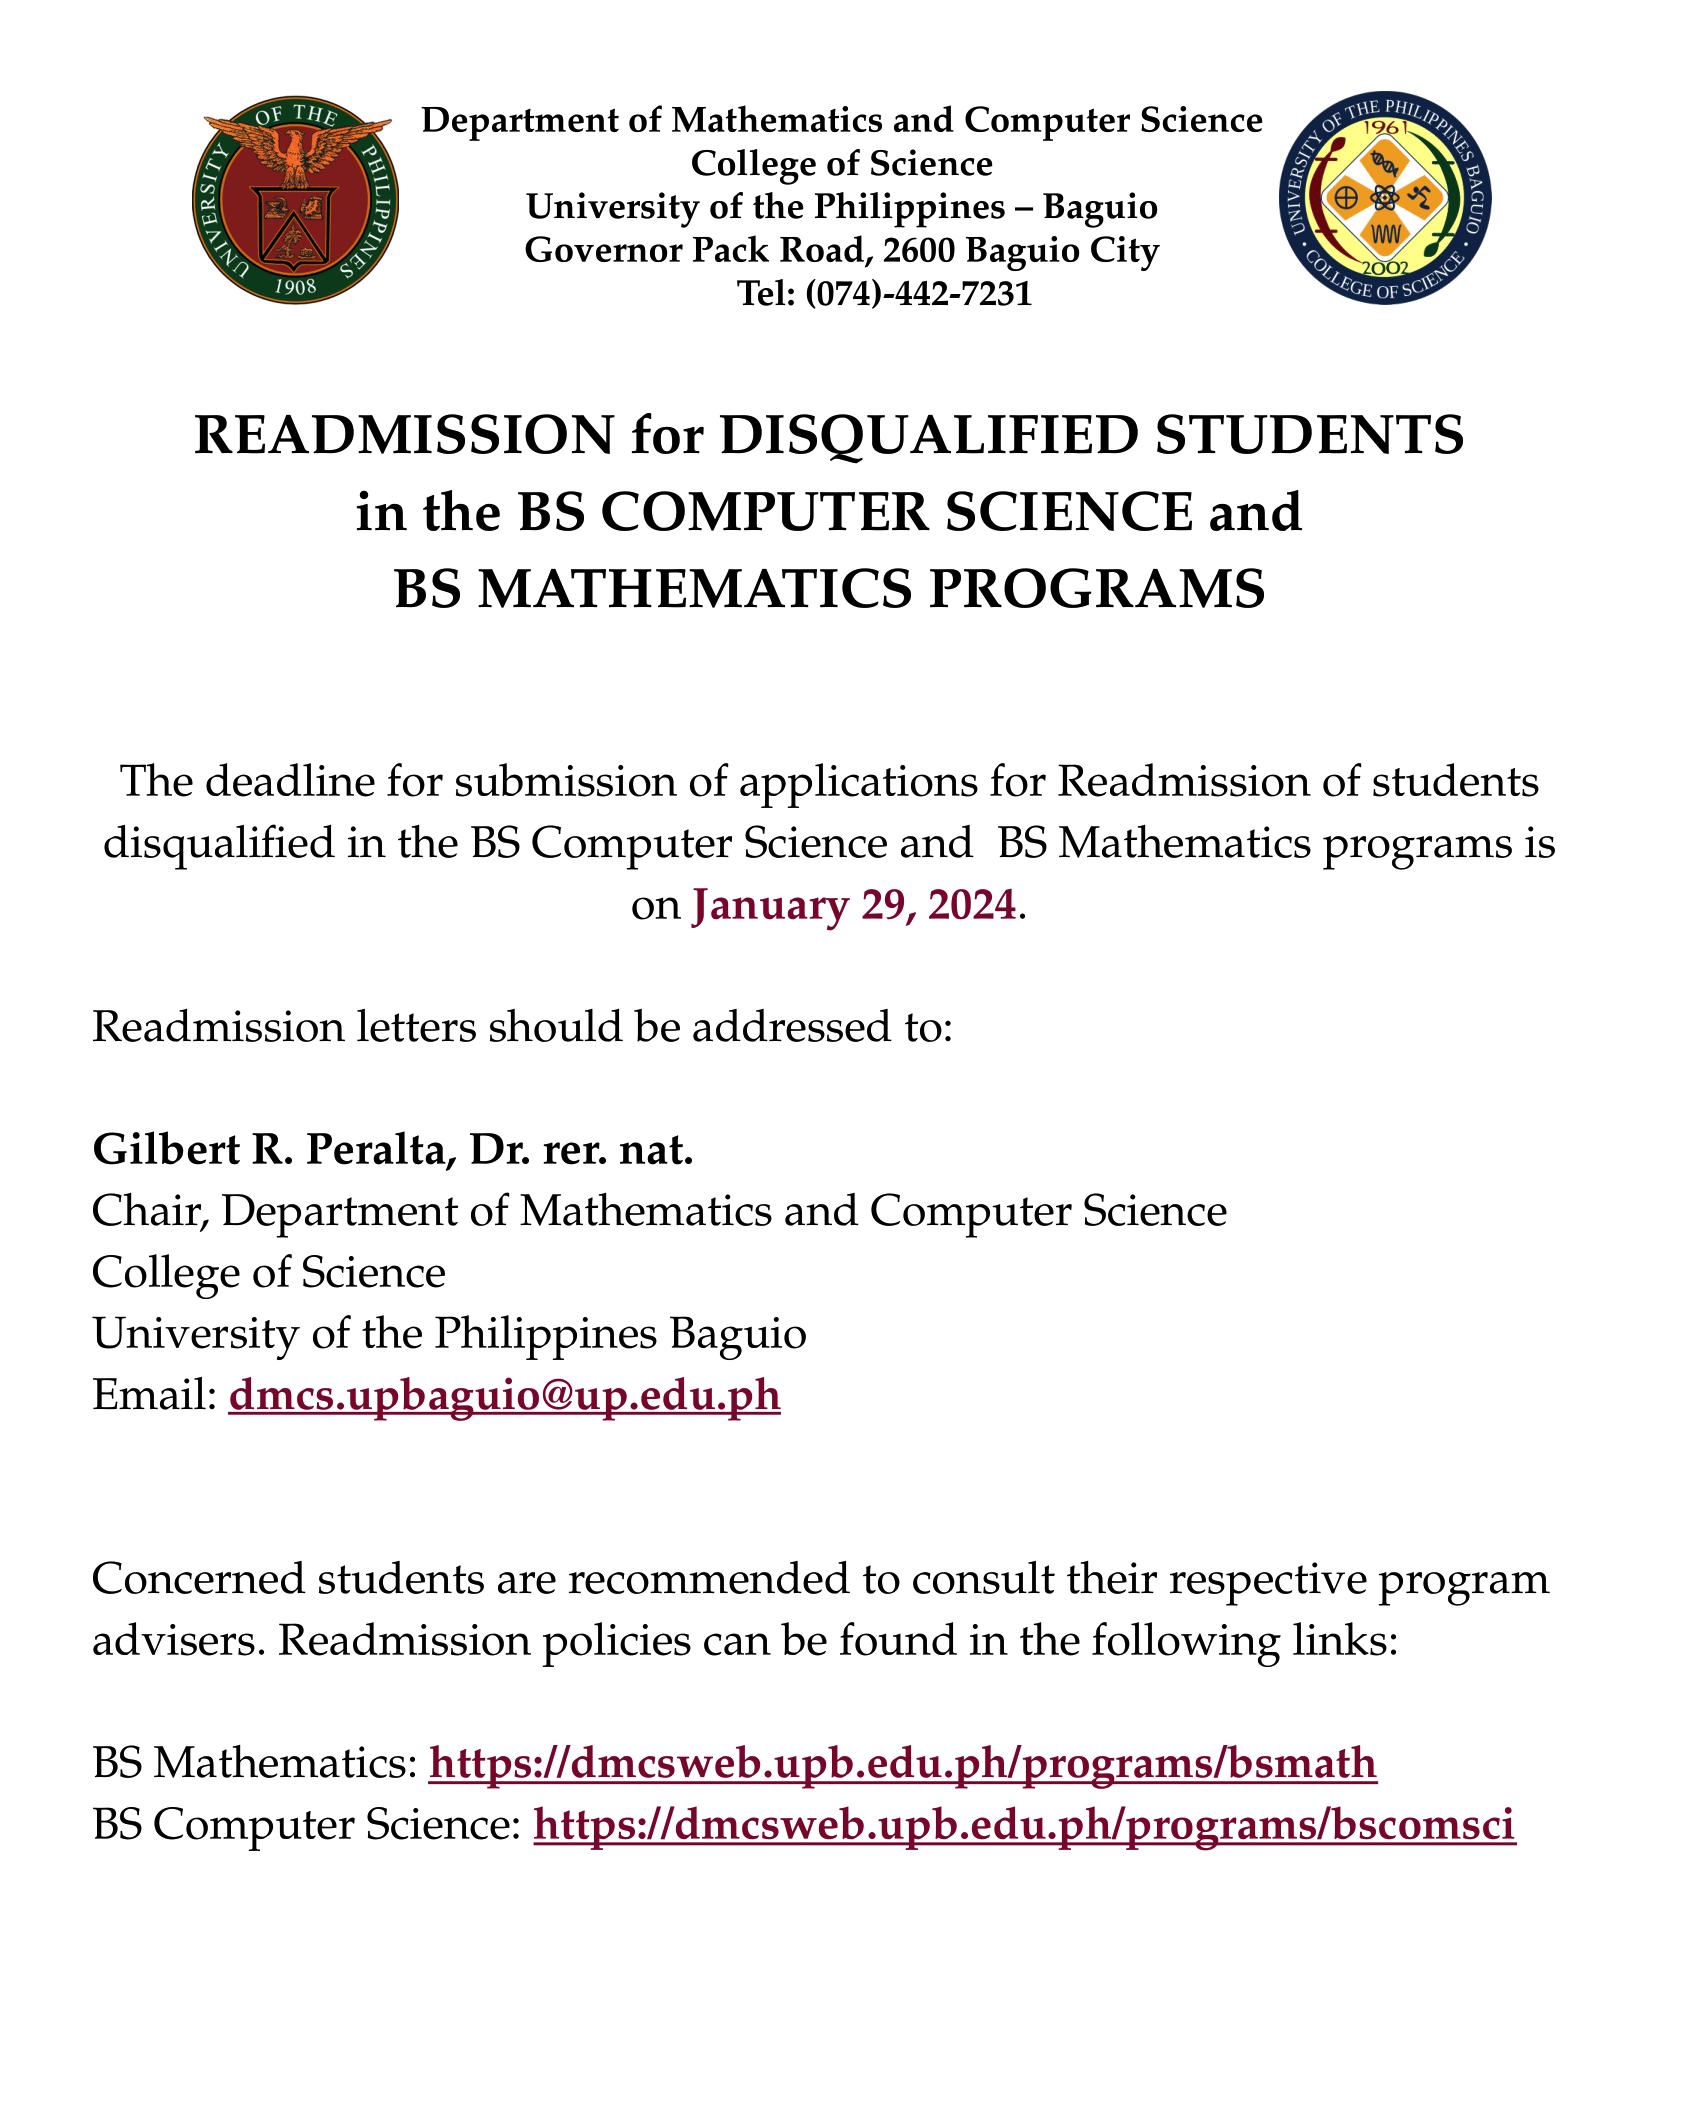 Readmission of Disqualified Students in the BS Computer Science and BS Mathematics Programs